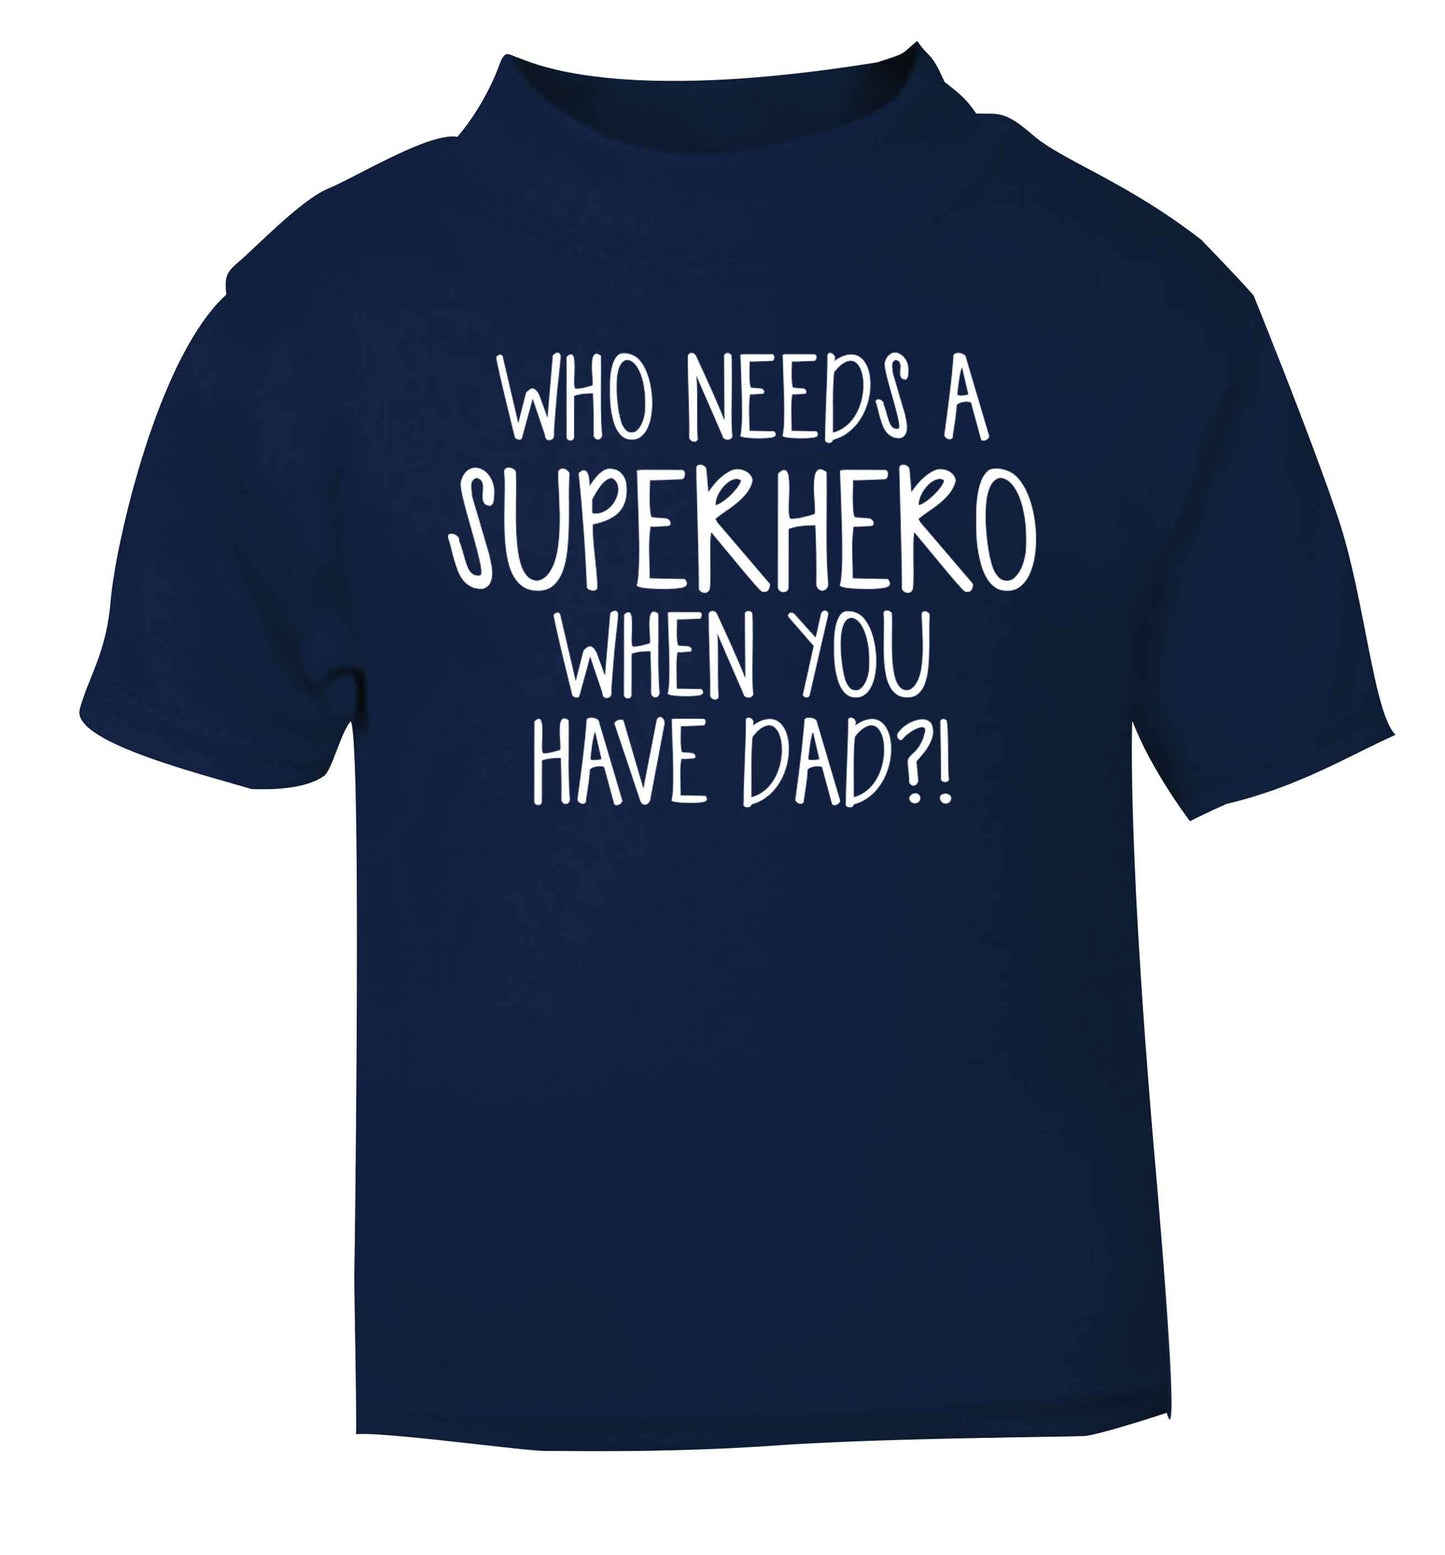 Who needs a superhero when you have dad! navy baby toddler Tshirt 2 Years